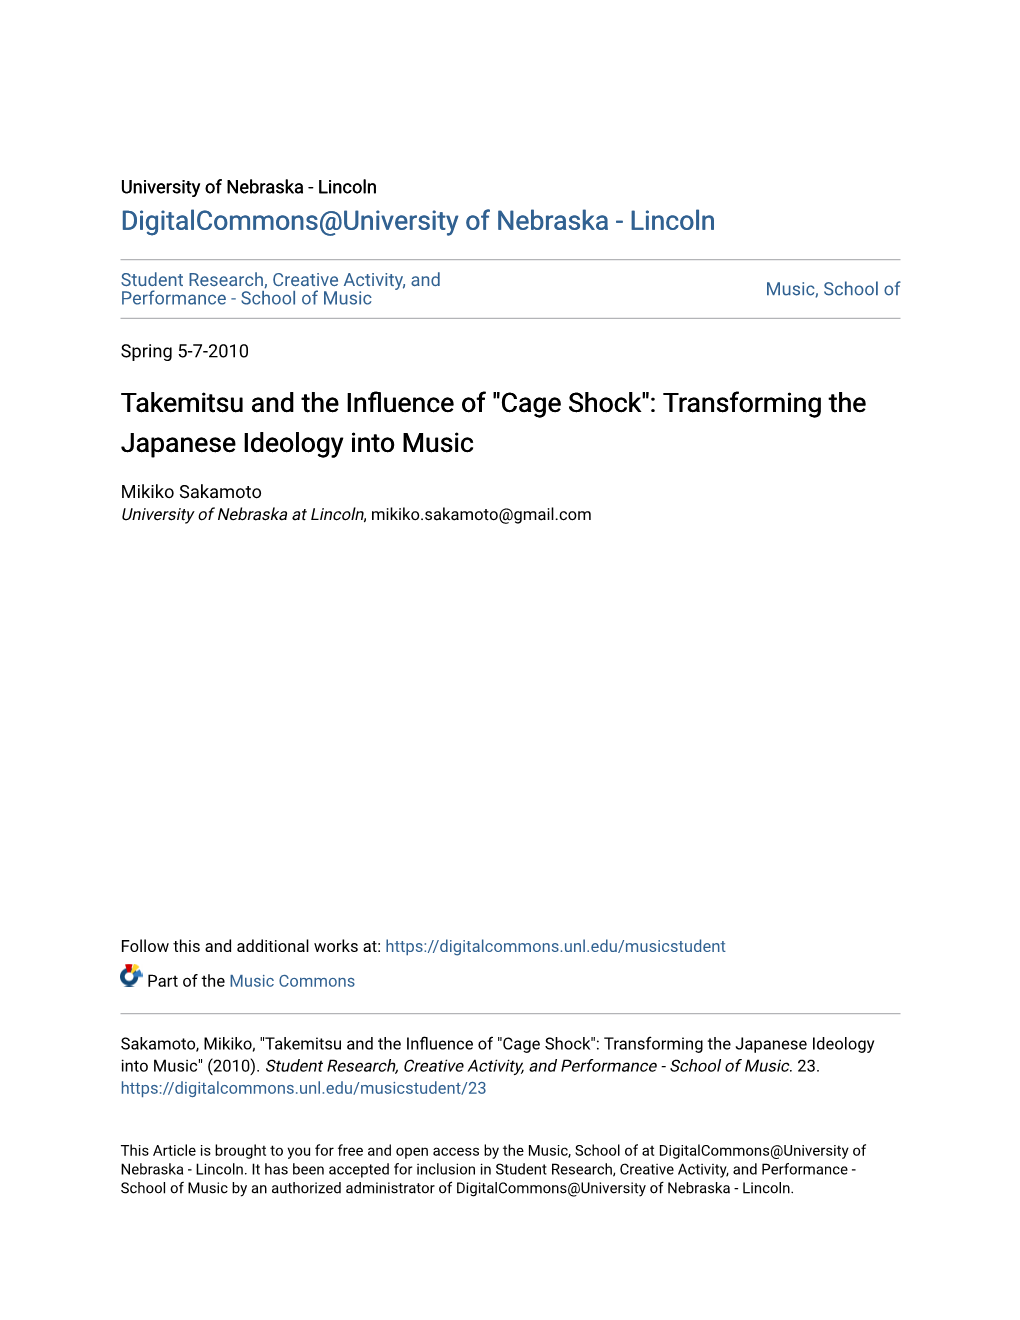 Takemitsu and the Influence of "Cage Shock": Transforming the Japanese